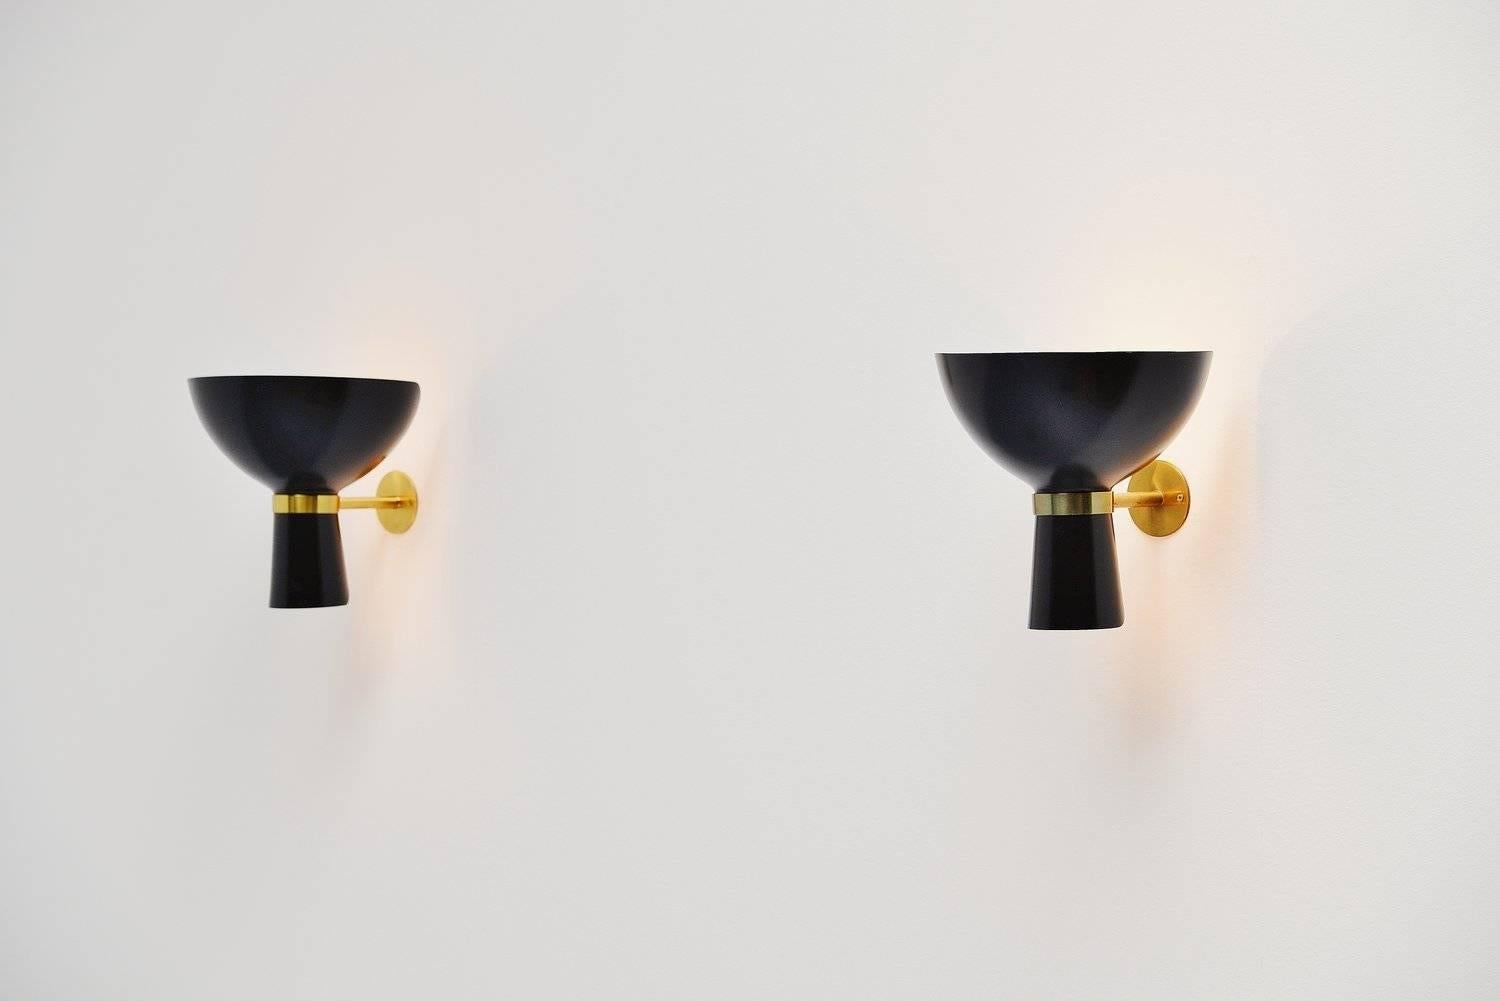 Very nice pair of Stilnovo sconces, Italy, 1950. These amazing shaped wall lamps have a bit Serge Mouille shaped shades black lacquered and they have brass arms. These amazing lamps give very nice warm indirect diffused light. Easy to wall hang